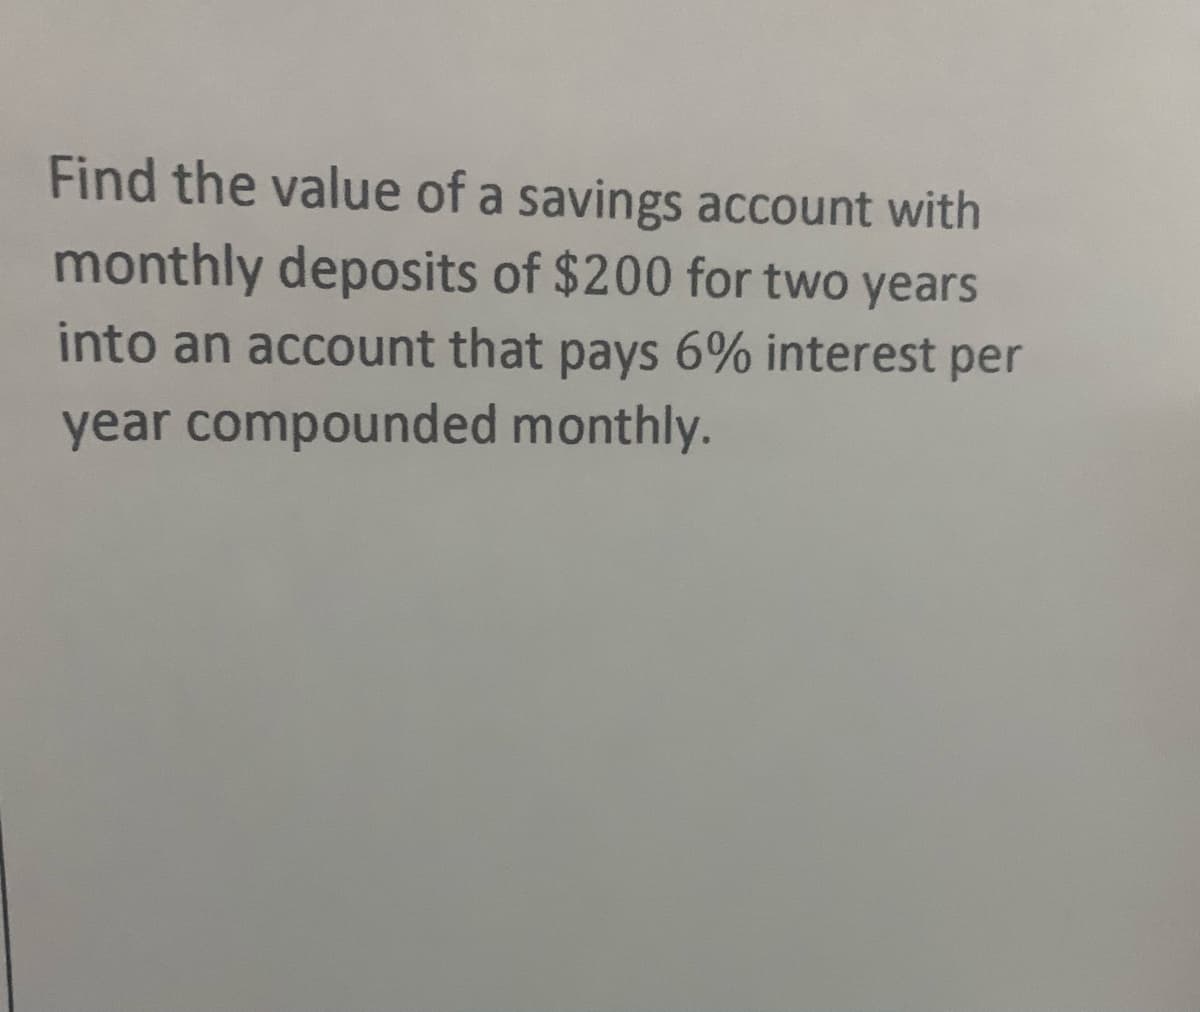 Find the value of a savings account with
monthly deposits of $200 for two years
into an account that pays 6% interest per
year compounded monthly.
